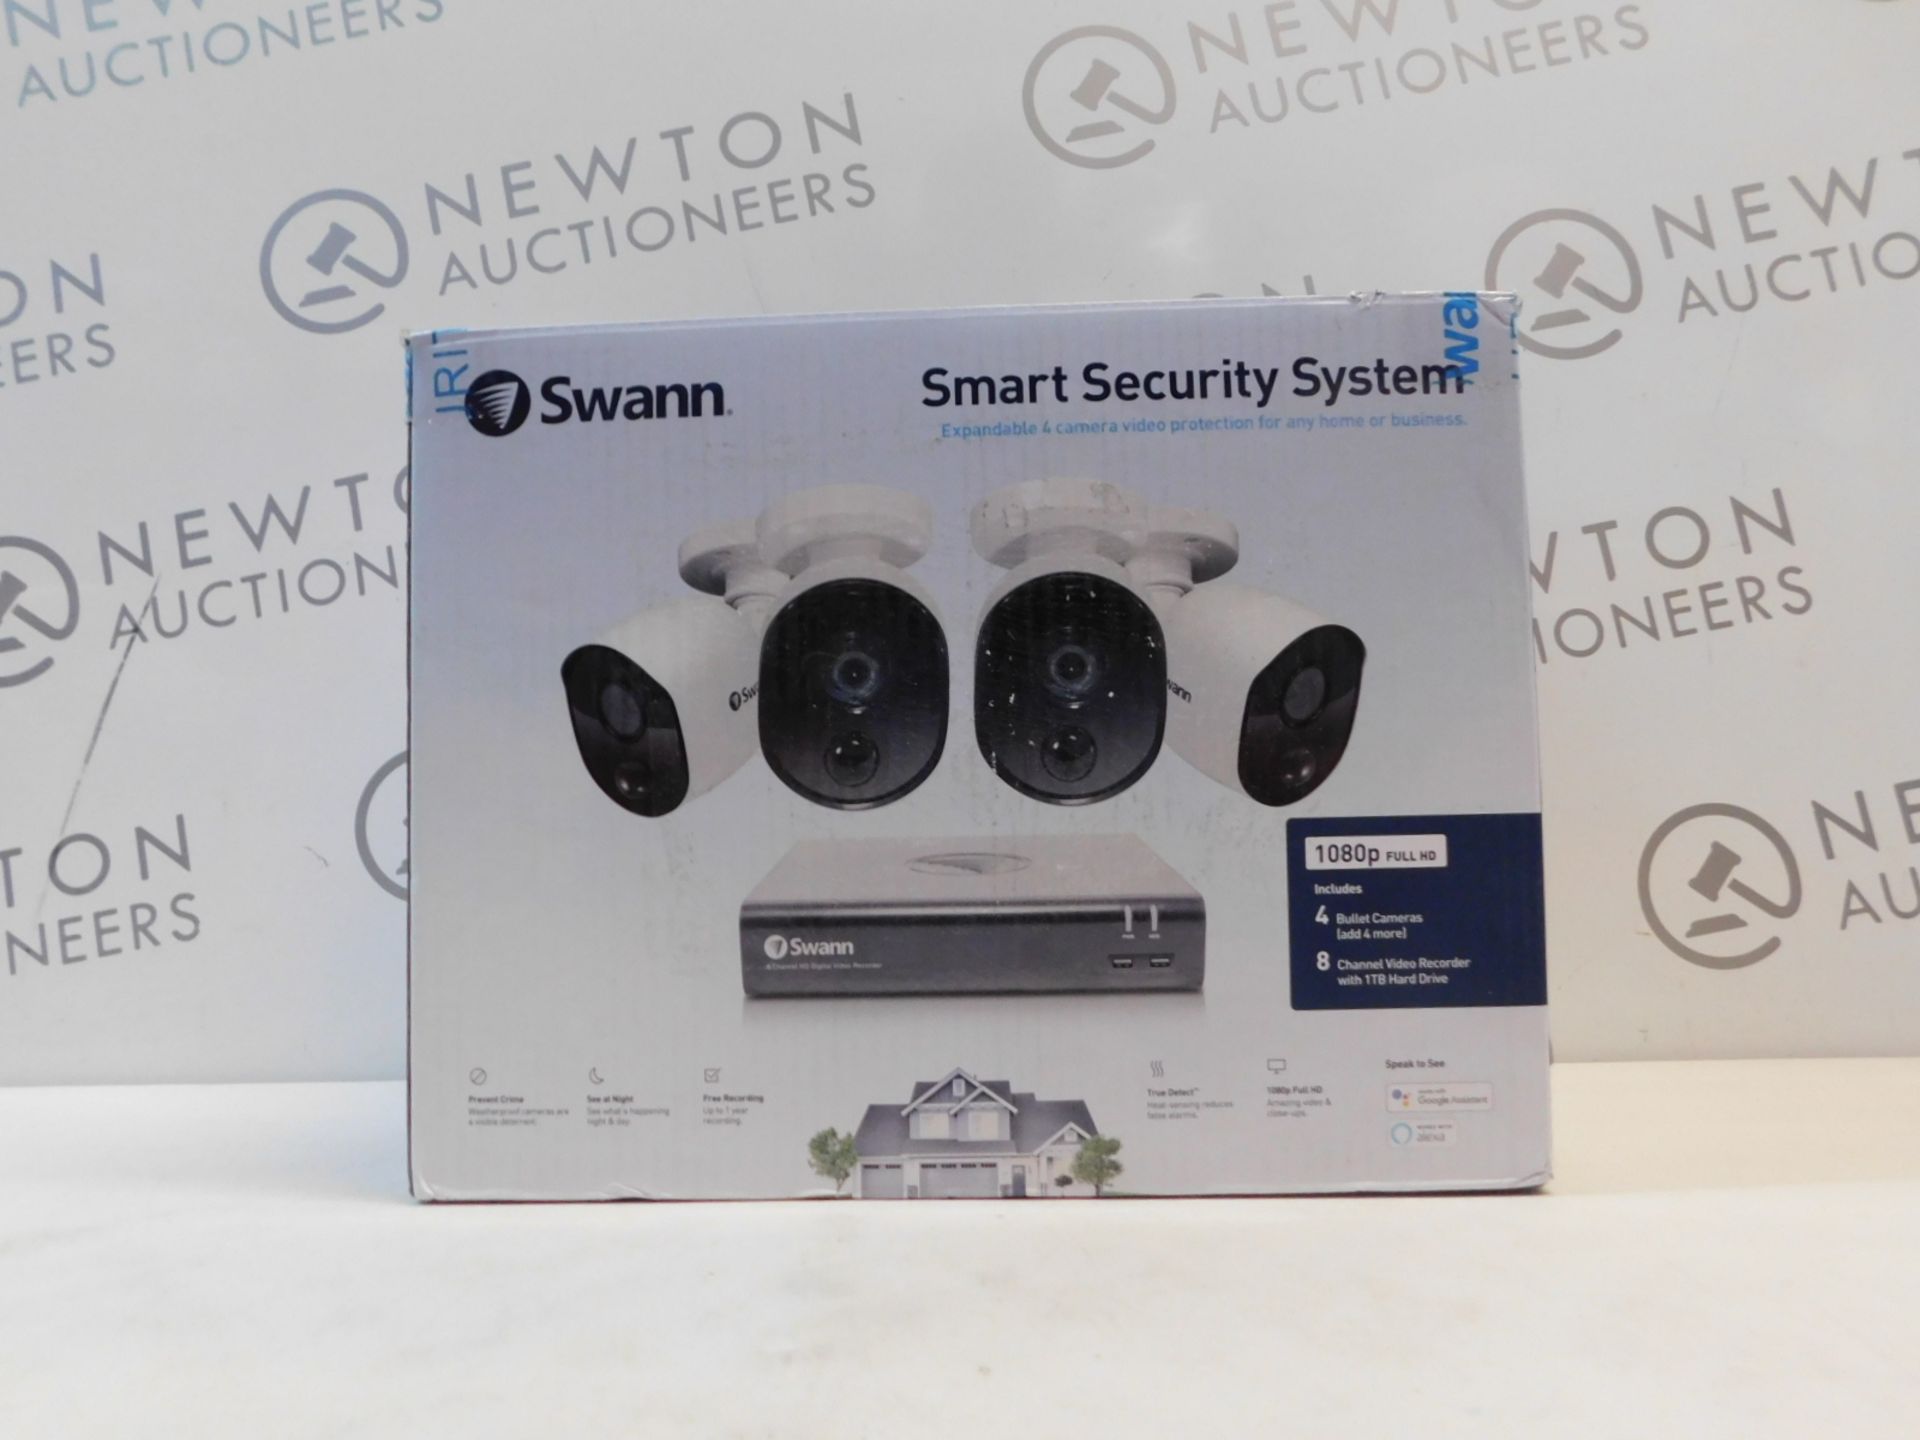 1 BOXED SWANN 8 CHANNEL SECURITY SYSTEM: 1080P FULL HD DVR-4575 WITH 1TB HDD & 4 X 1080P THERMAL